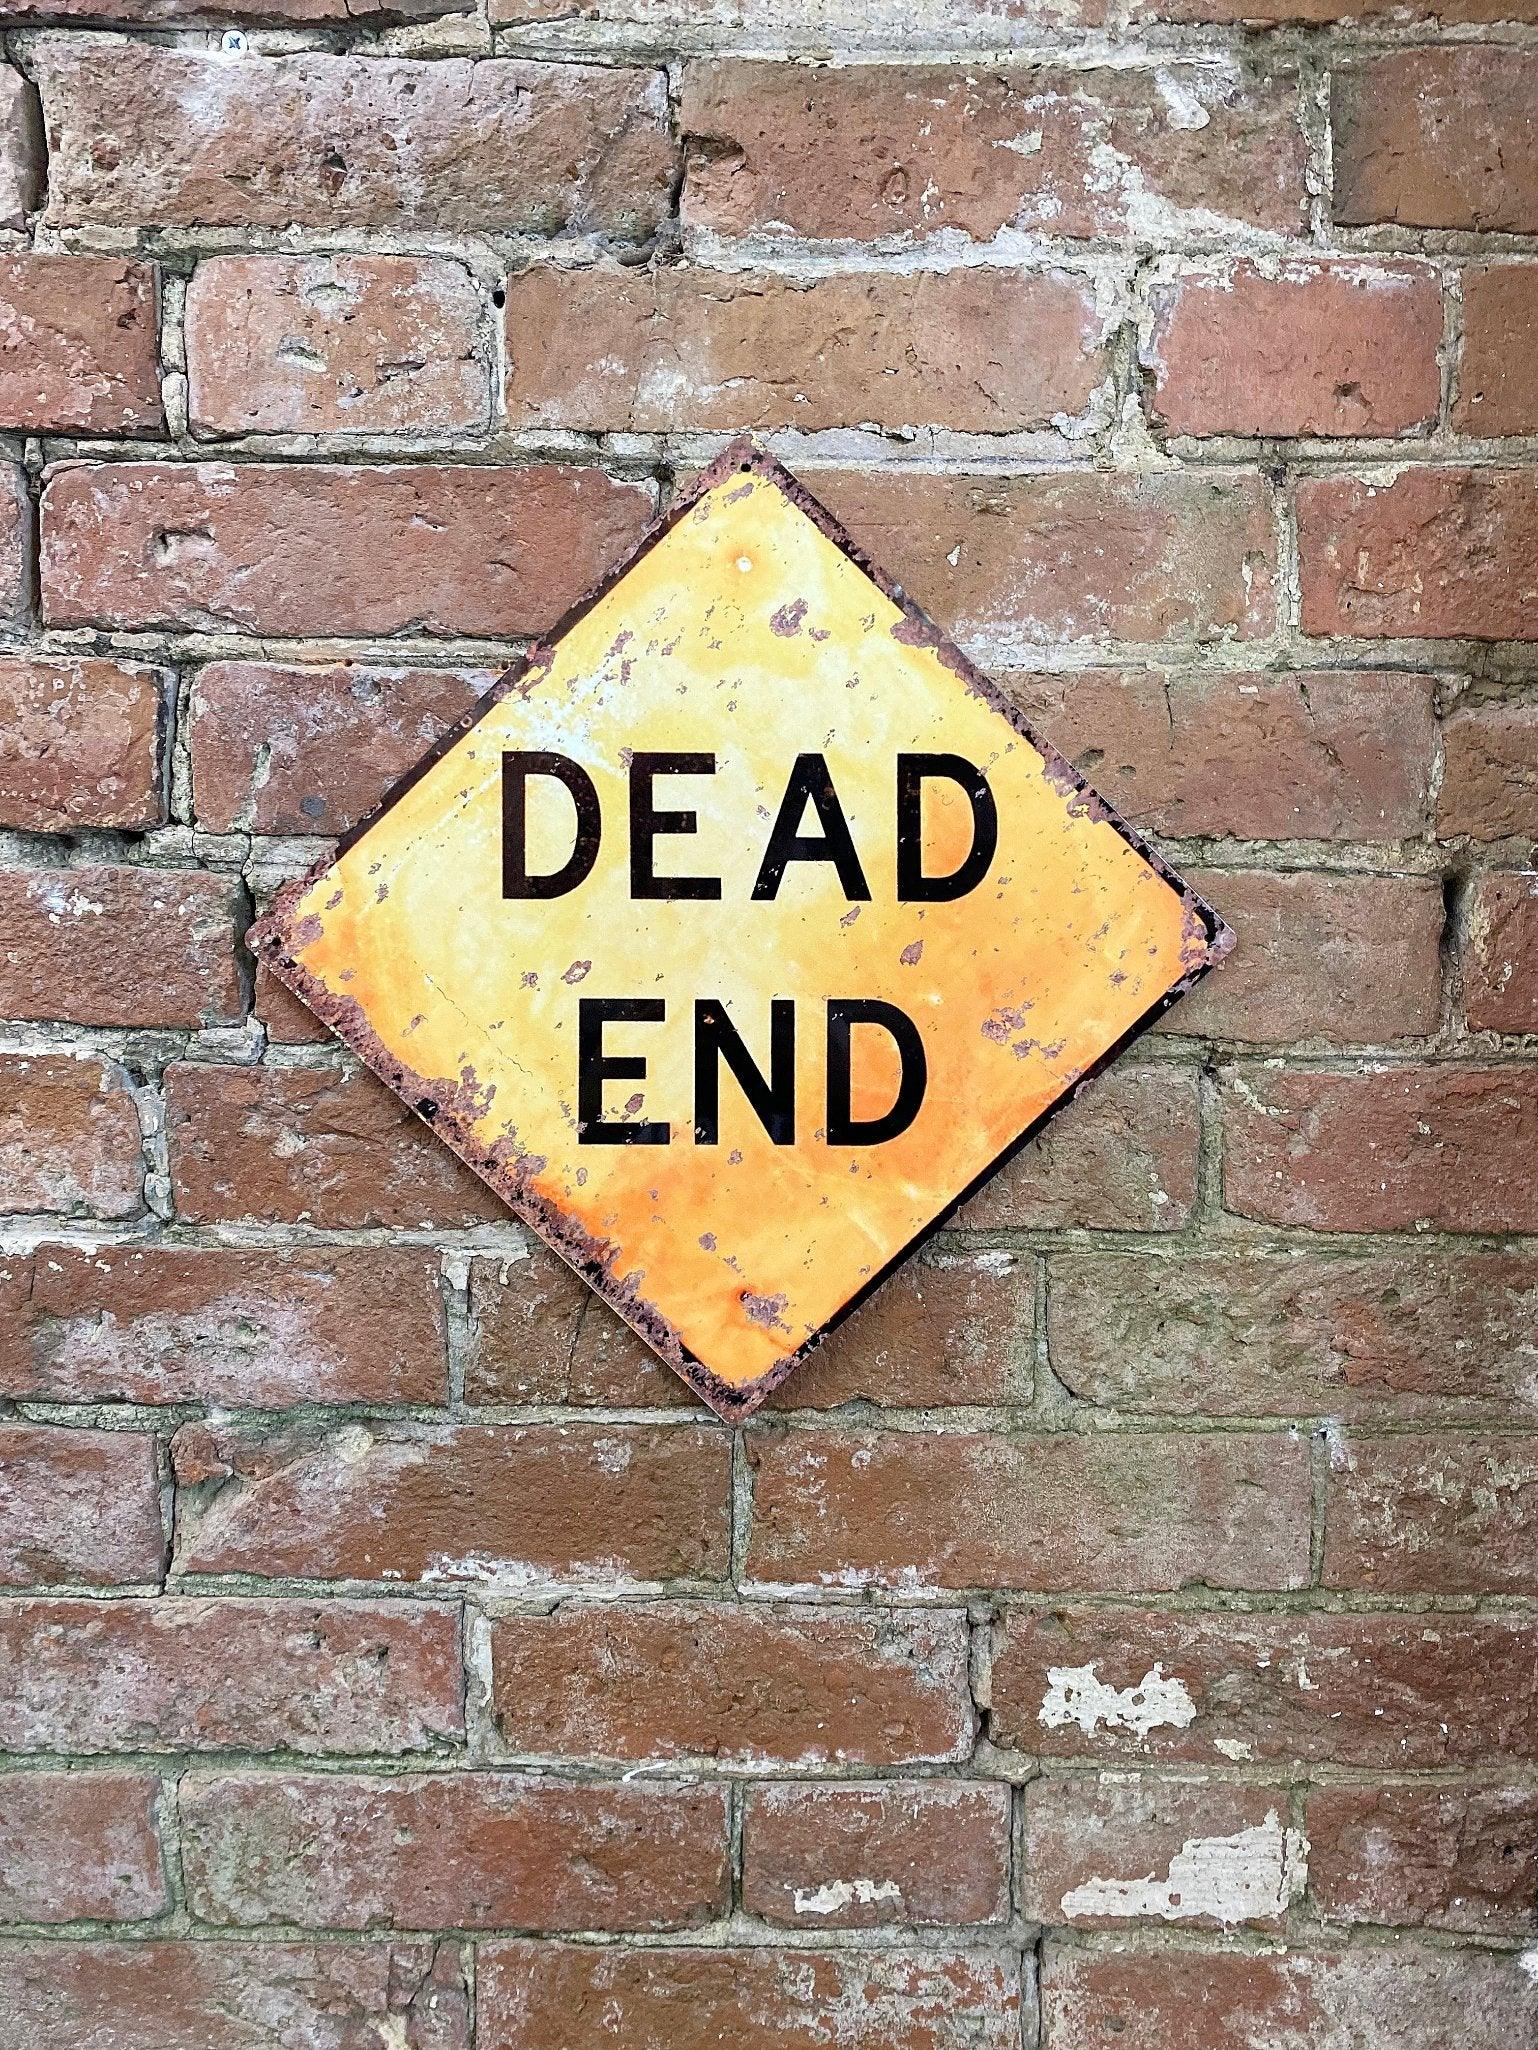 View Metal Square Wall Sign Dead End information